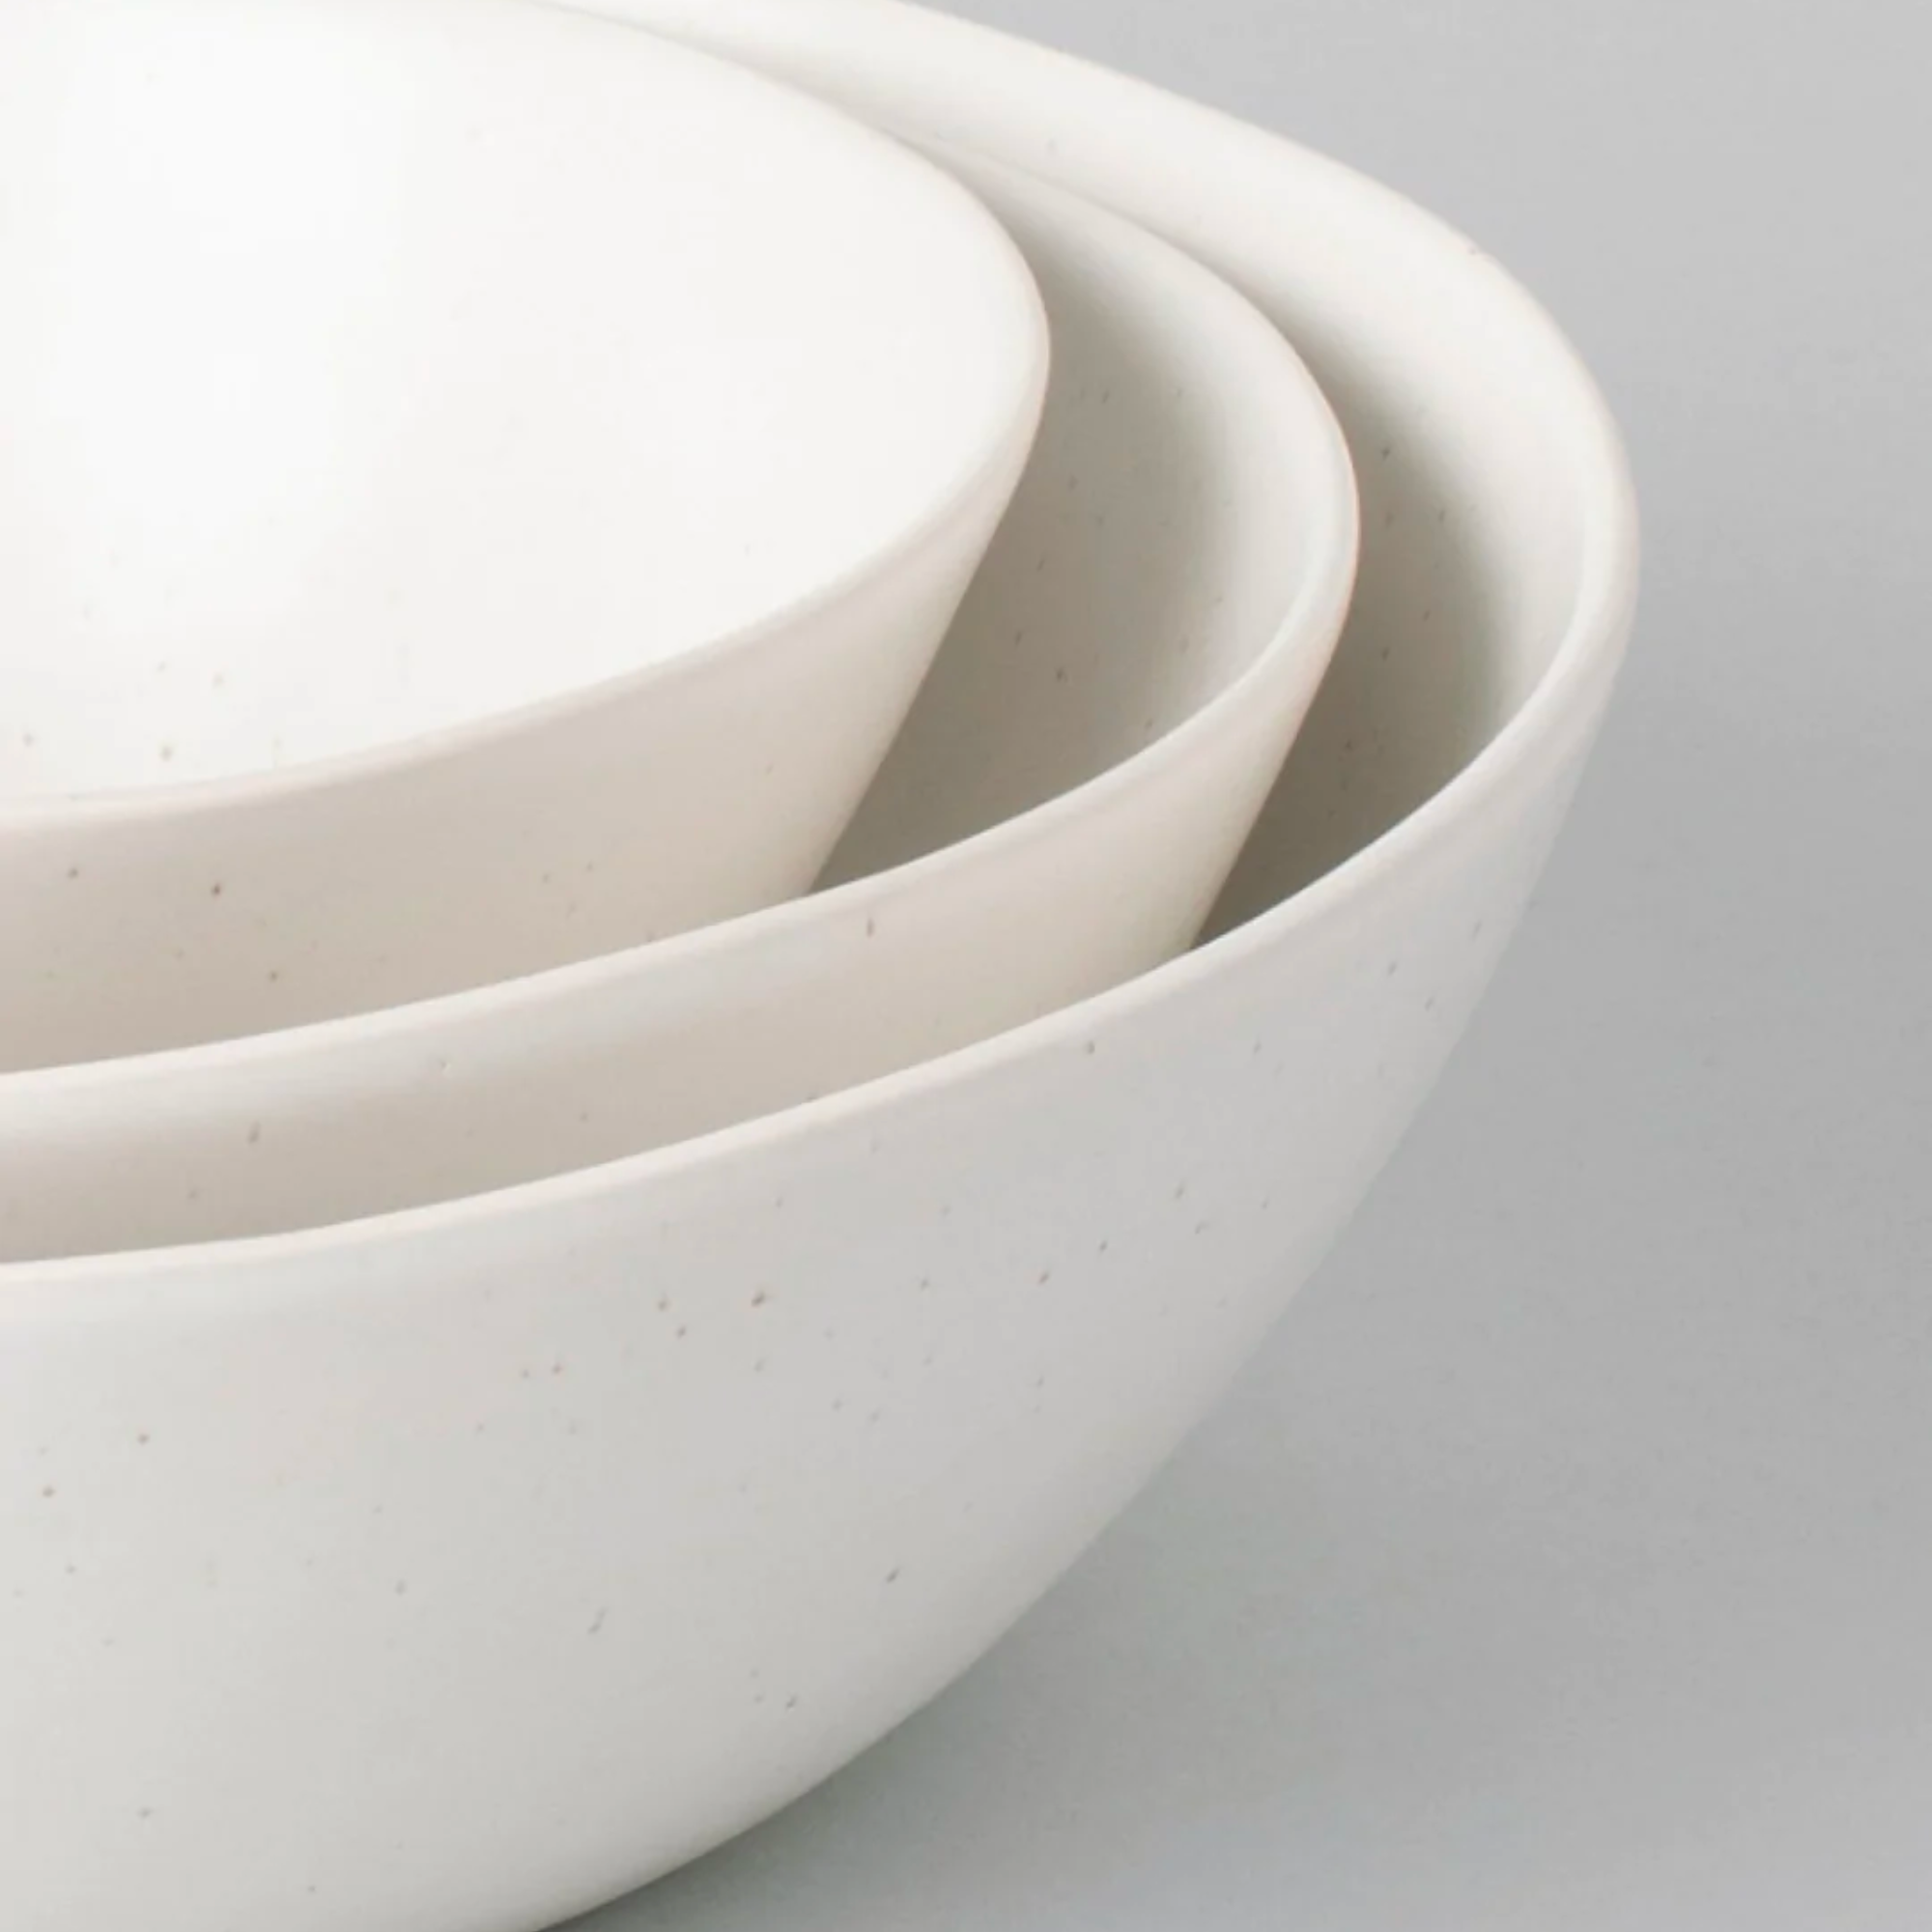 Fable Nested Serving Bowls - Speckled White